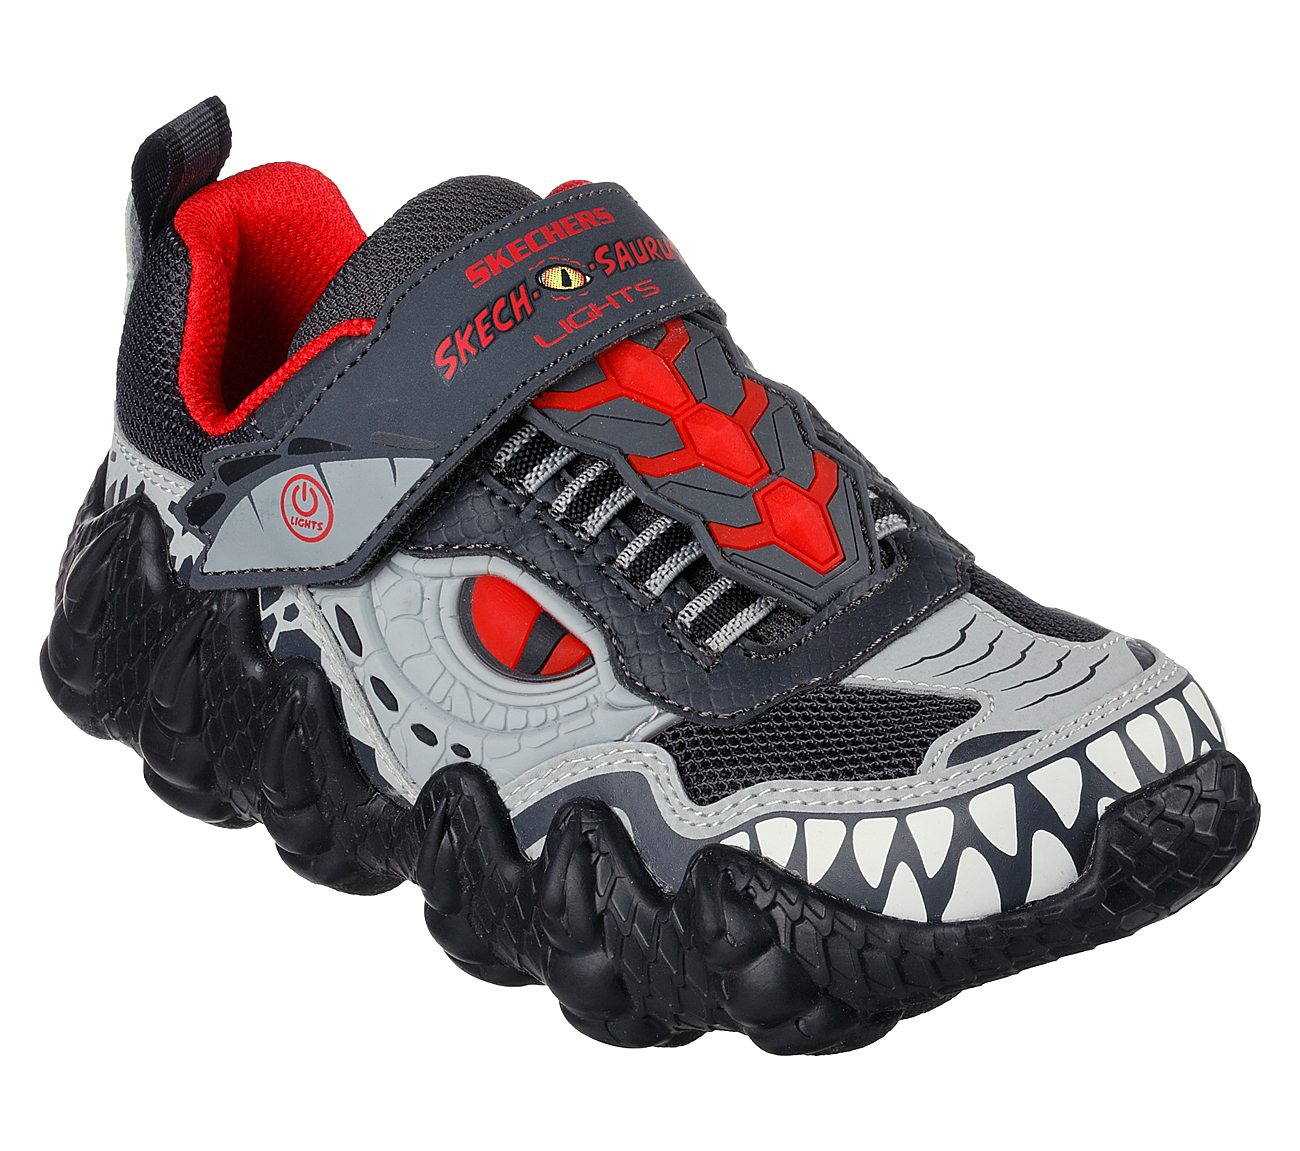 SKECH-O-SAURUS LIGHTS-DINO-TR, CHARCOAL/RED Footwear Lateral View